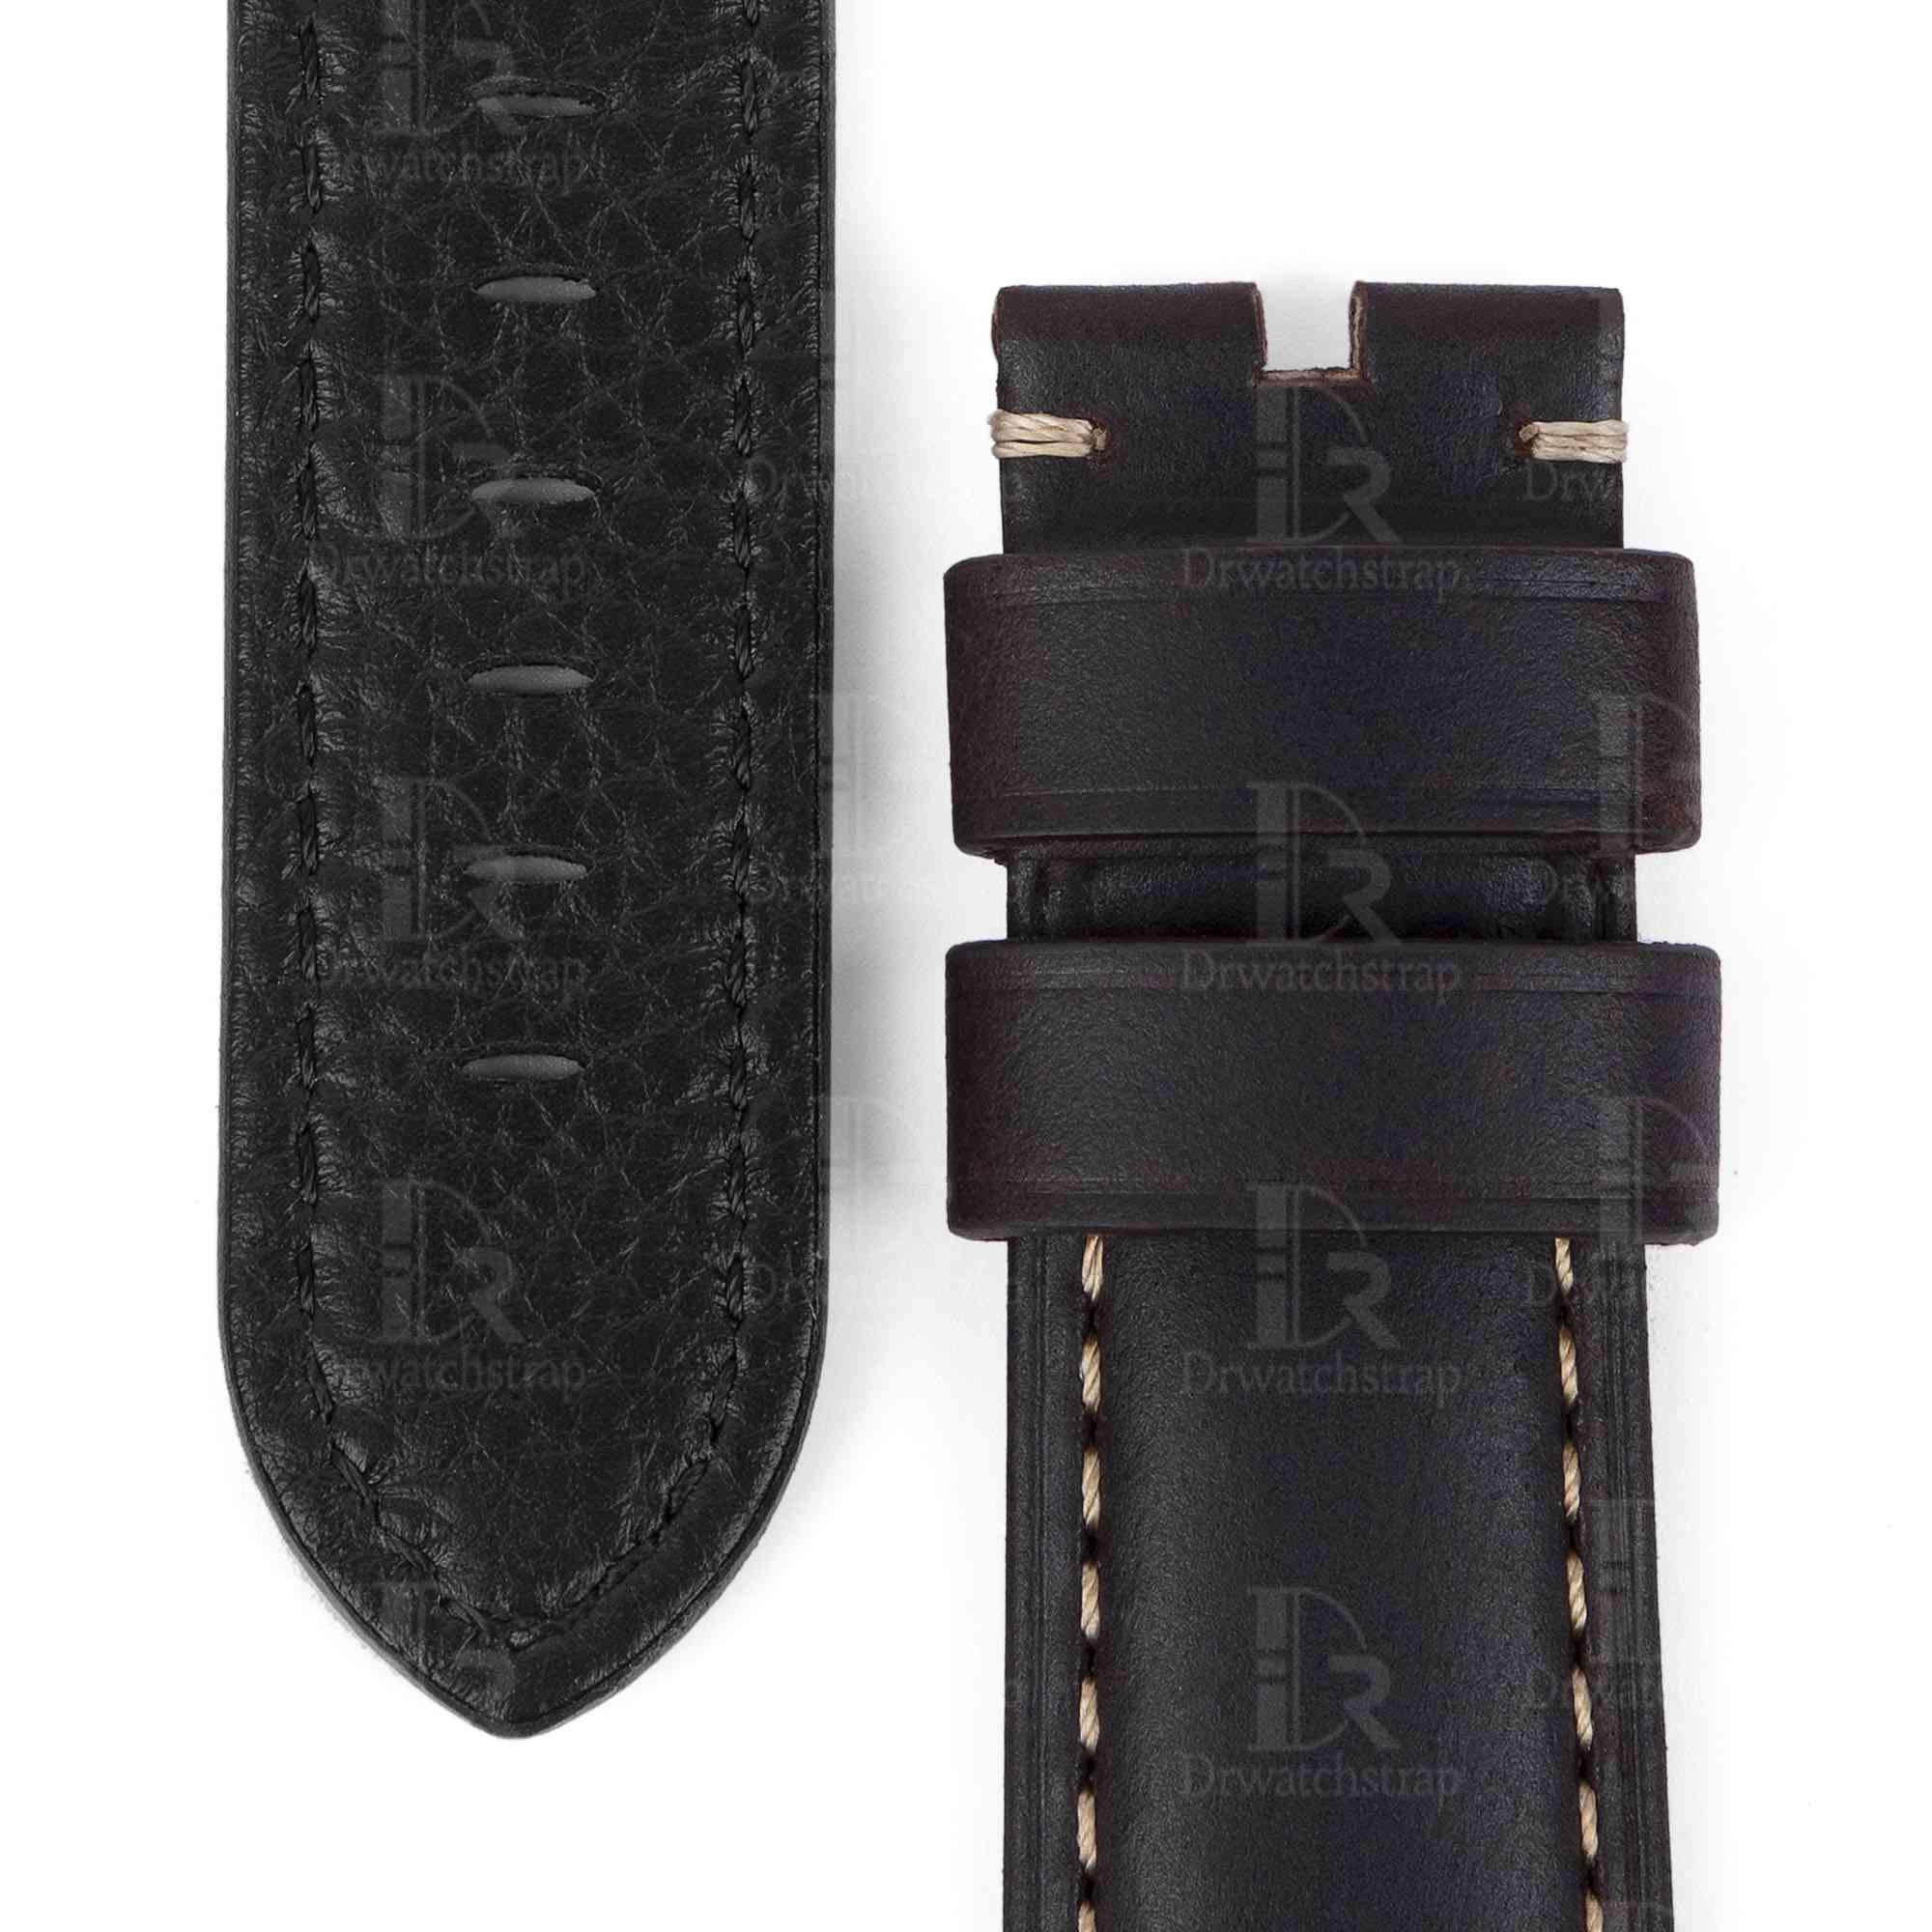 Premium best quality OEM brown handmade aftermarket Panerai strap 22mm 24mm 26mm leather strap & watch band replacement for Panerai Luminor Due Radiomir luxury watches from DR Watchstrap - Shop genuine calf leather straps and watch bands online for sale at a low price